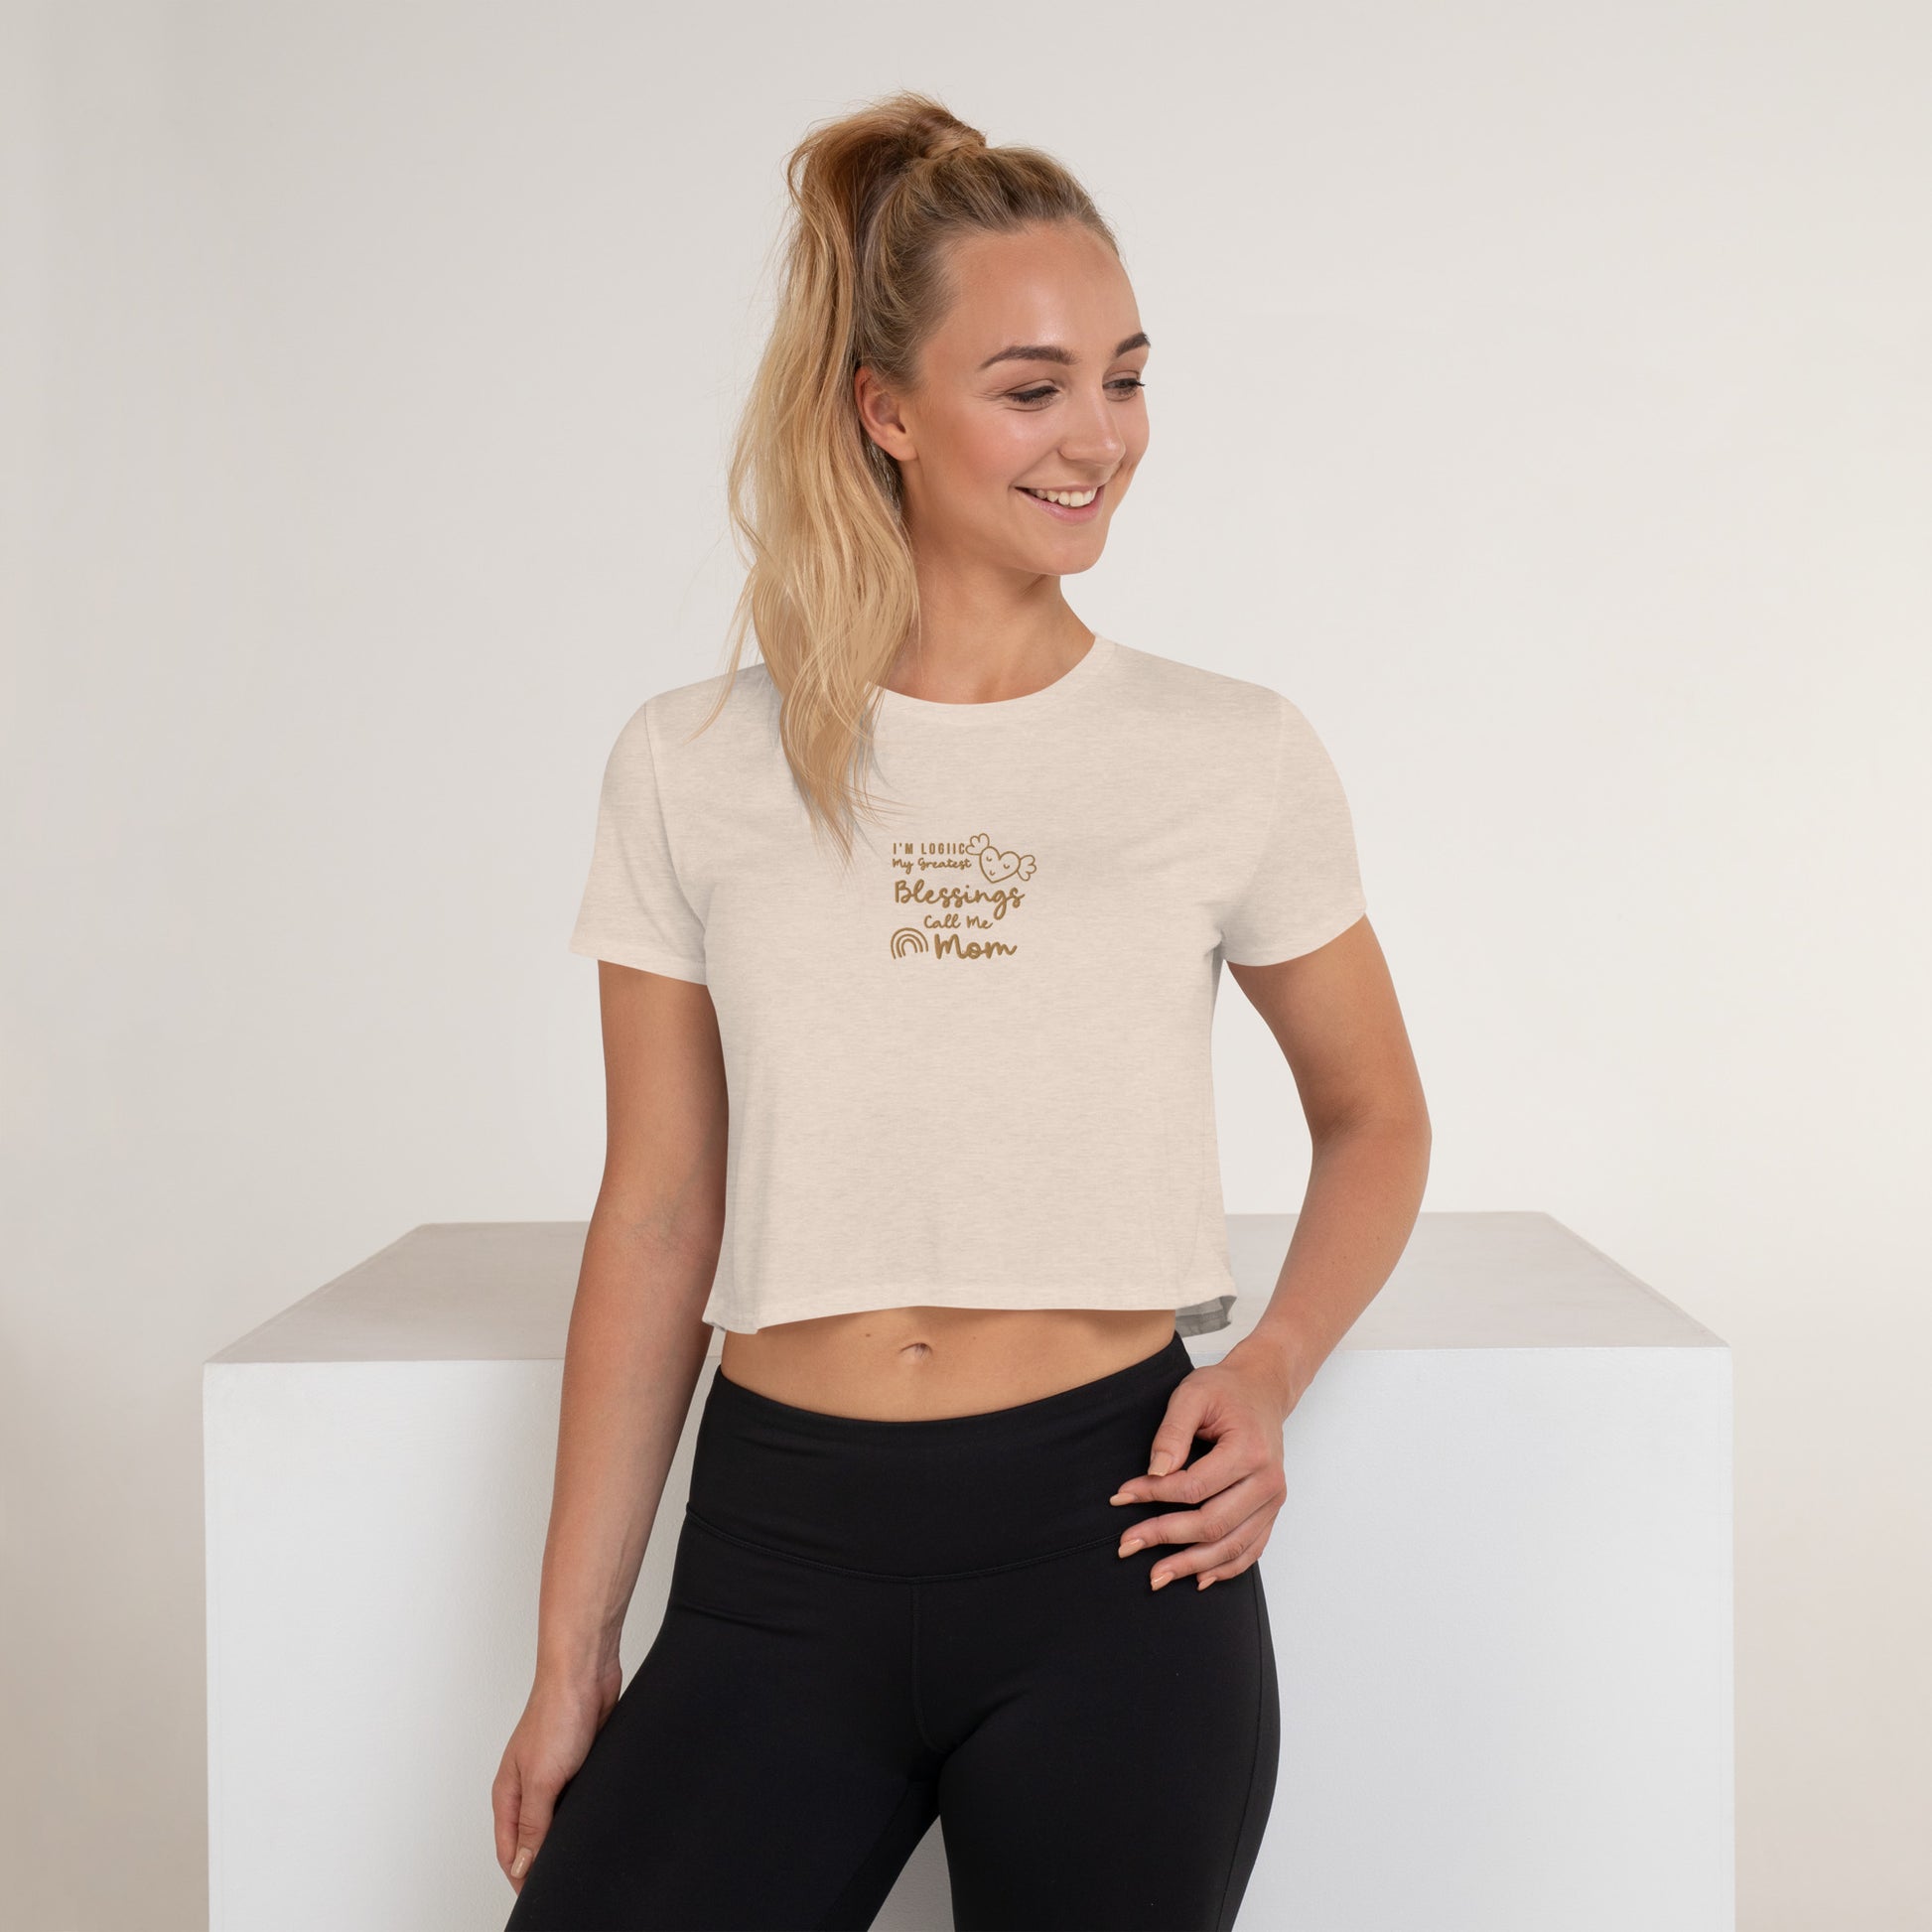 Blessings Mom Crop Tee - Shirts & Tops